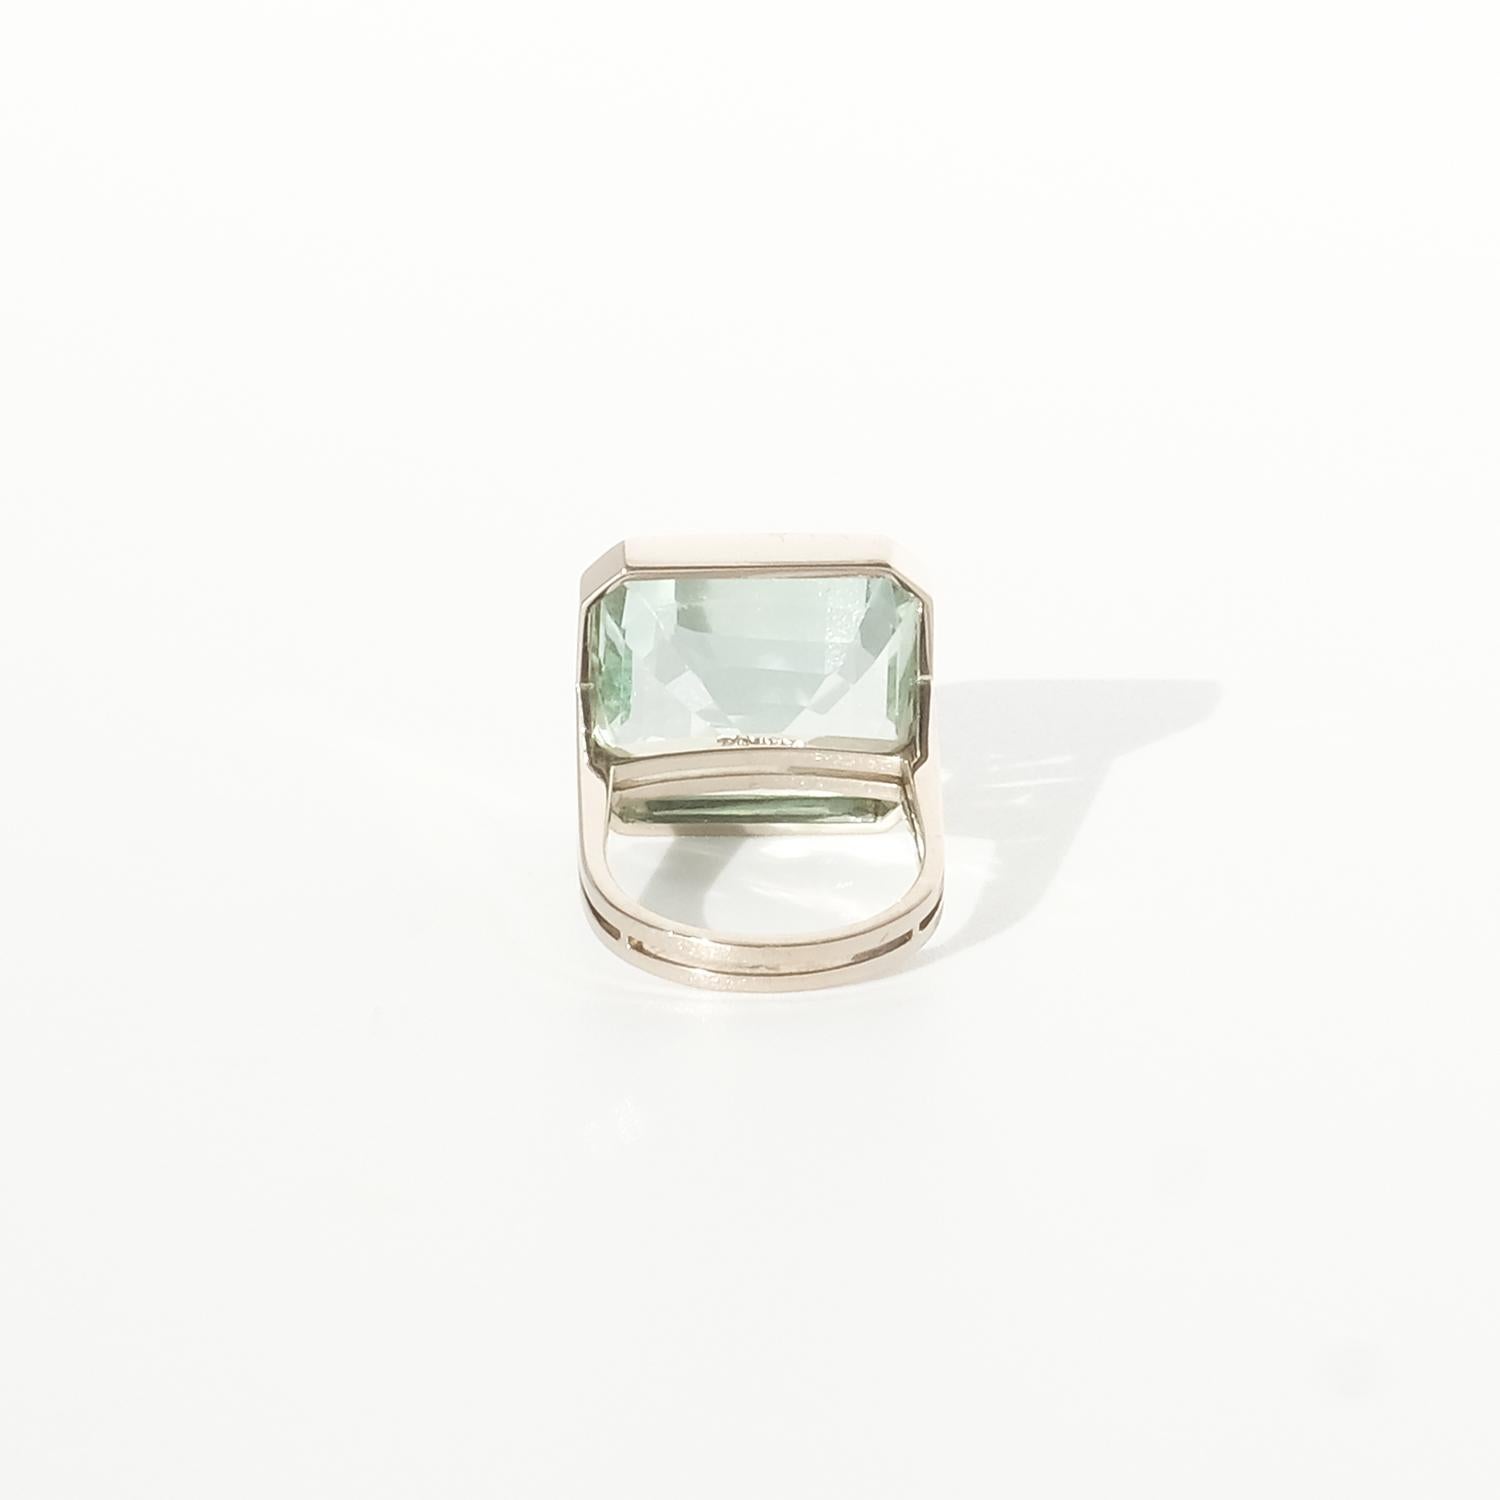 18k White Gold and Green Beryl Ring by Rey Urban, Sweden, Made Year 1980 1